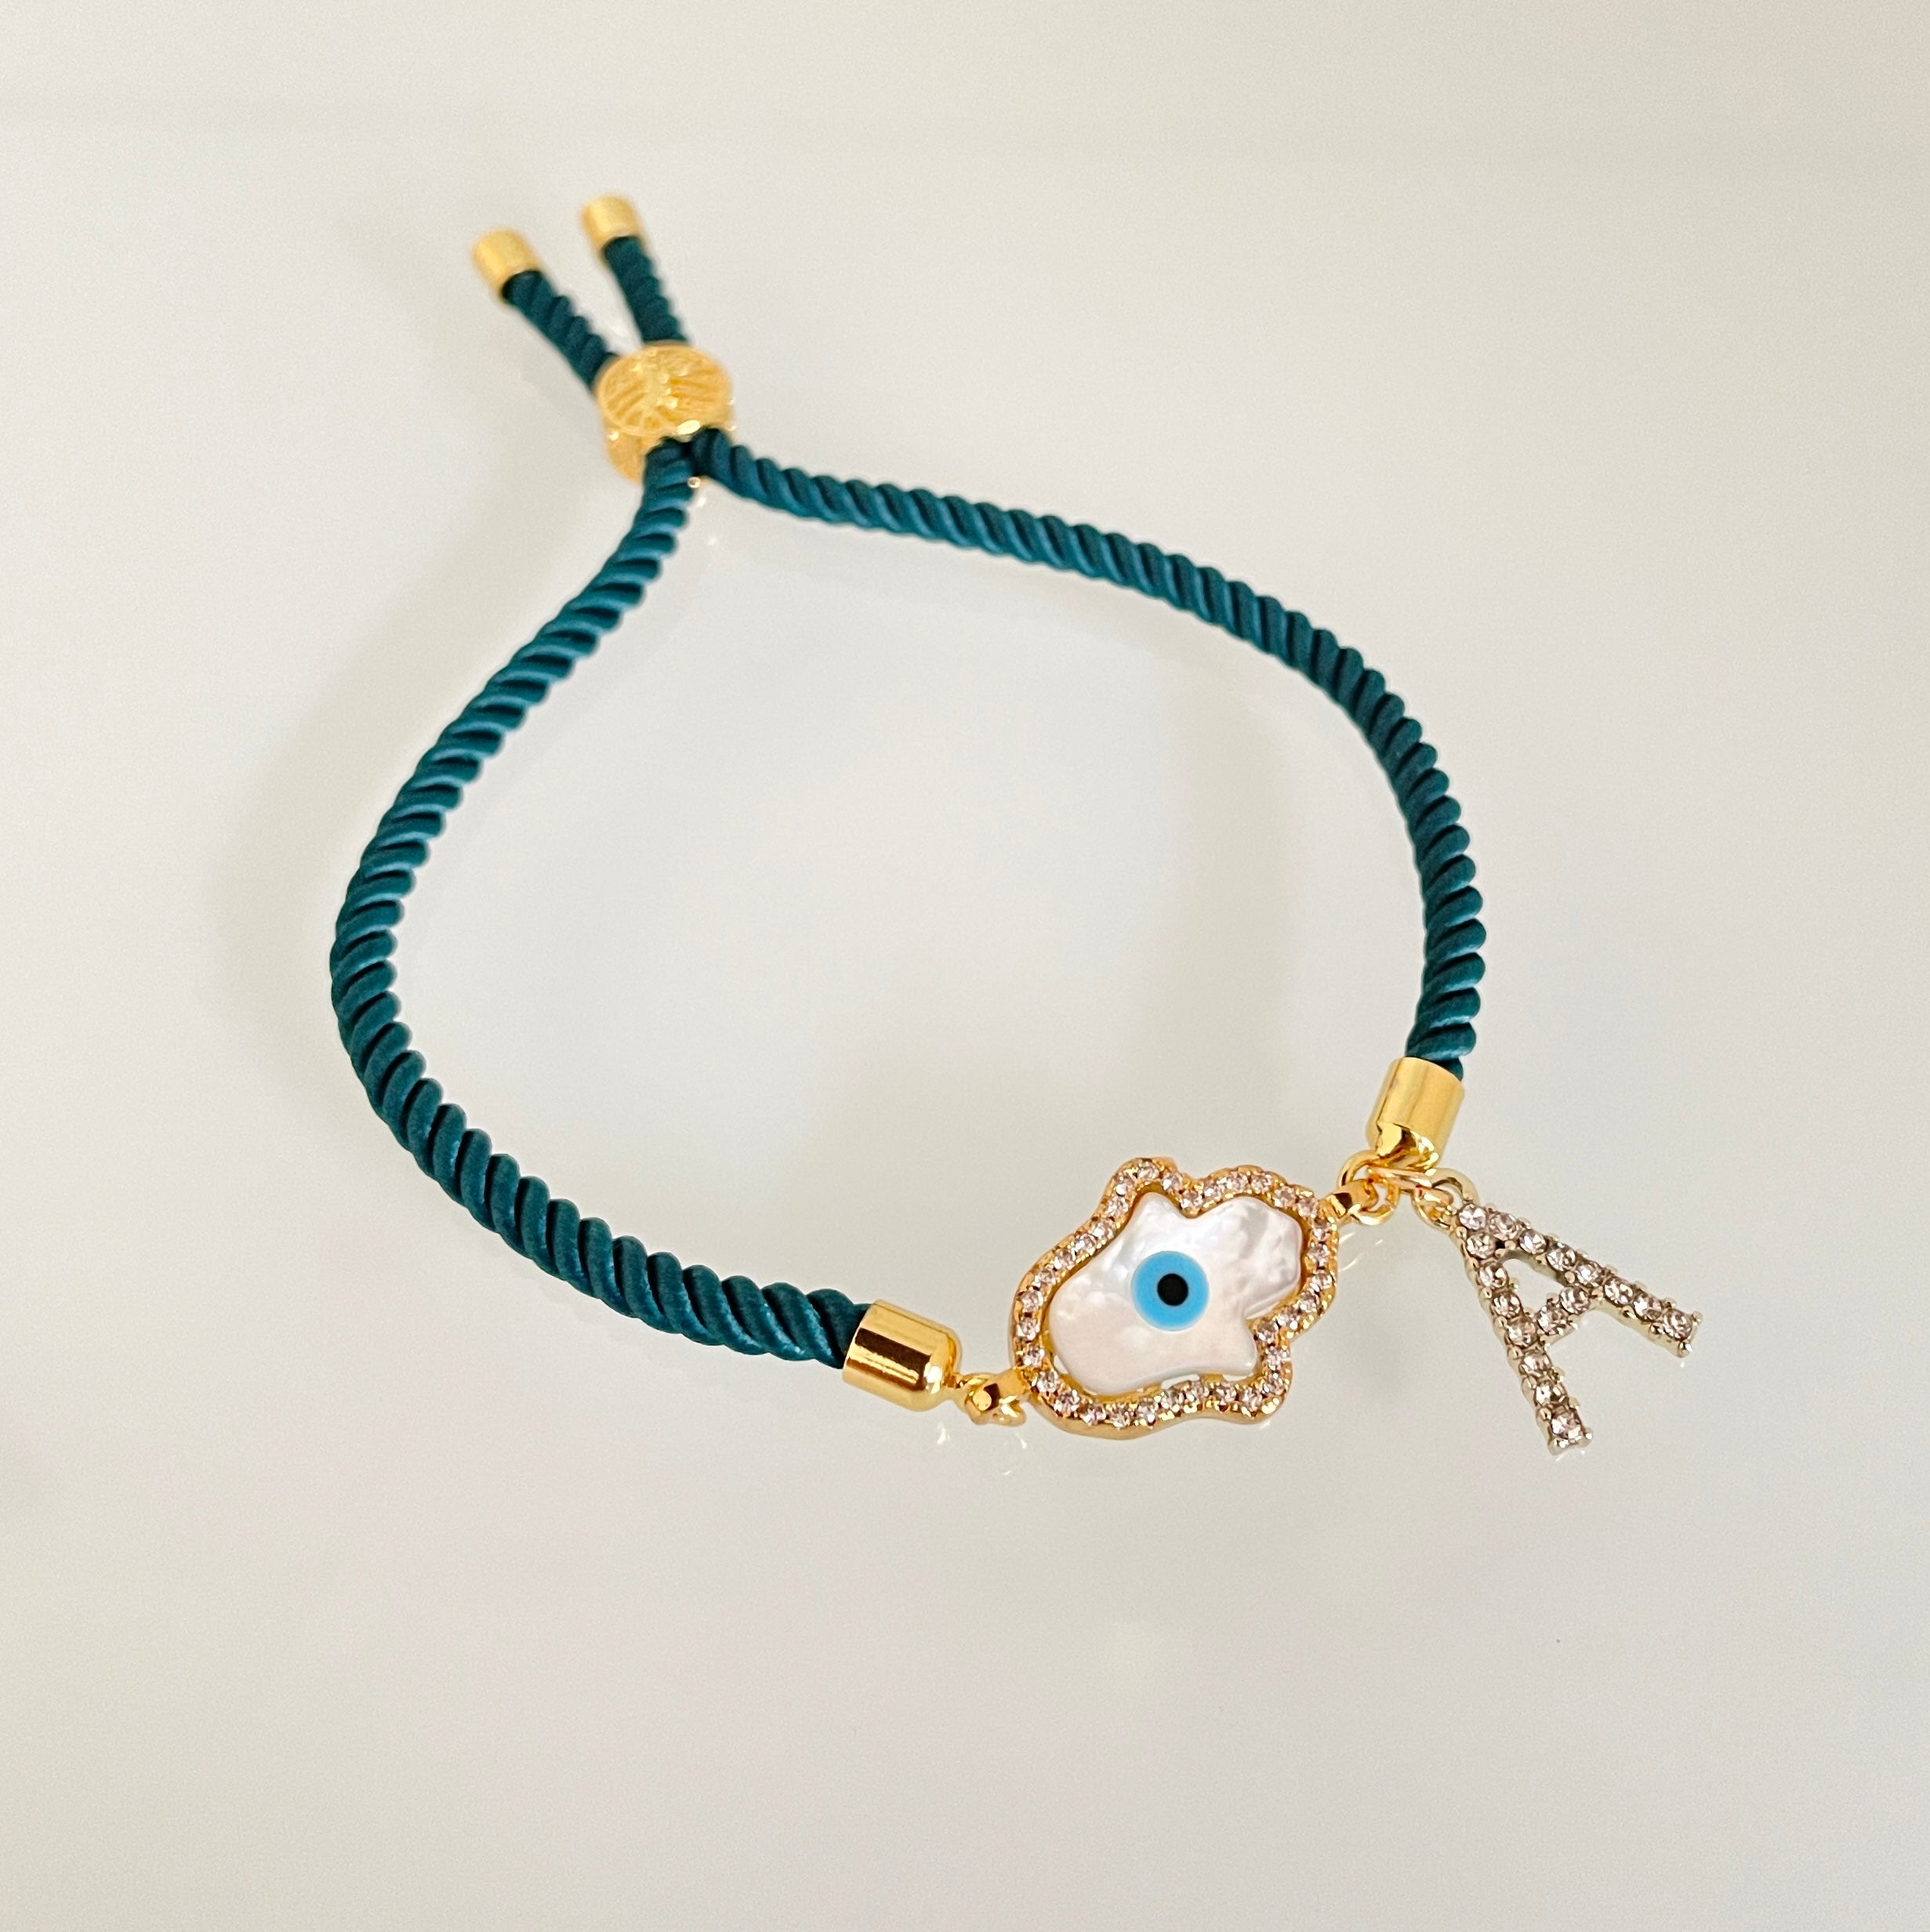 Buy Green Evil Eye Bracelet for Prosperity Health and Protection,  Handmade-good-luck Charm Gifts by Lucky Charms USA Online in India - Etsy